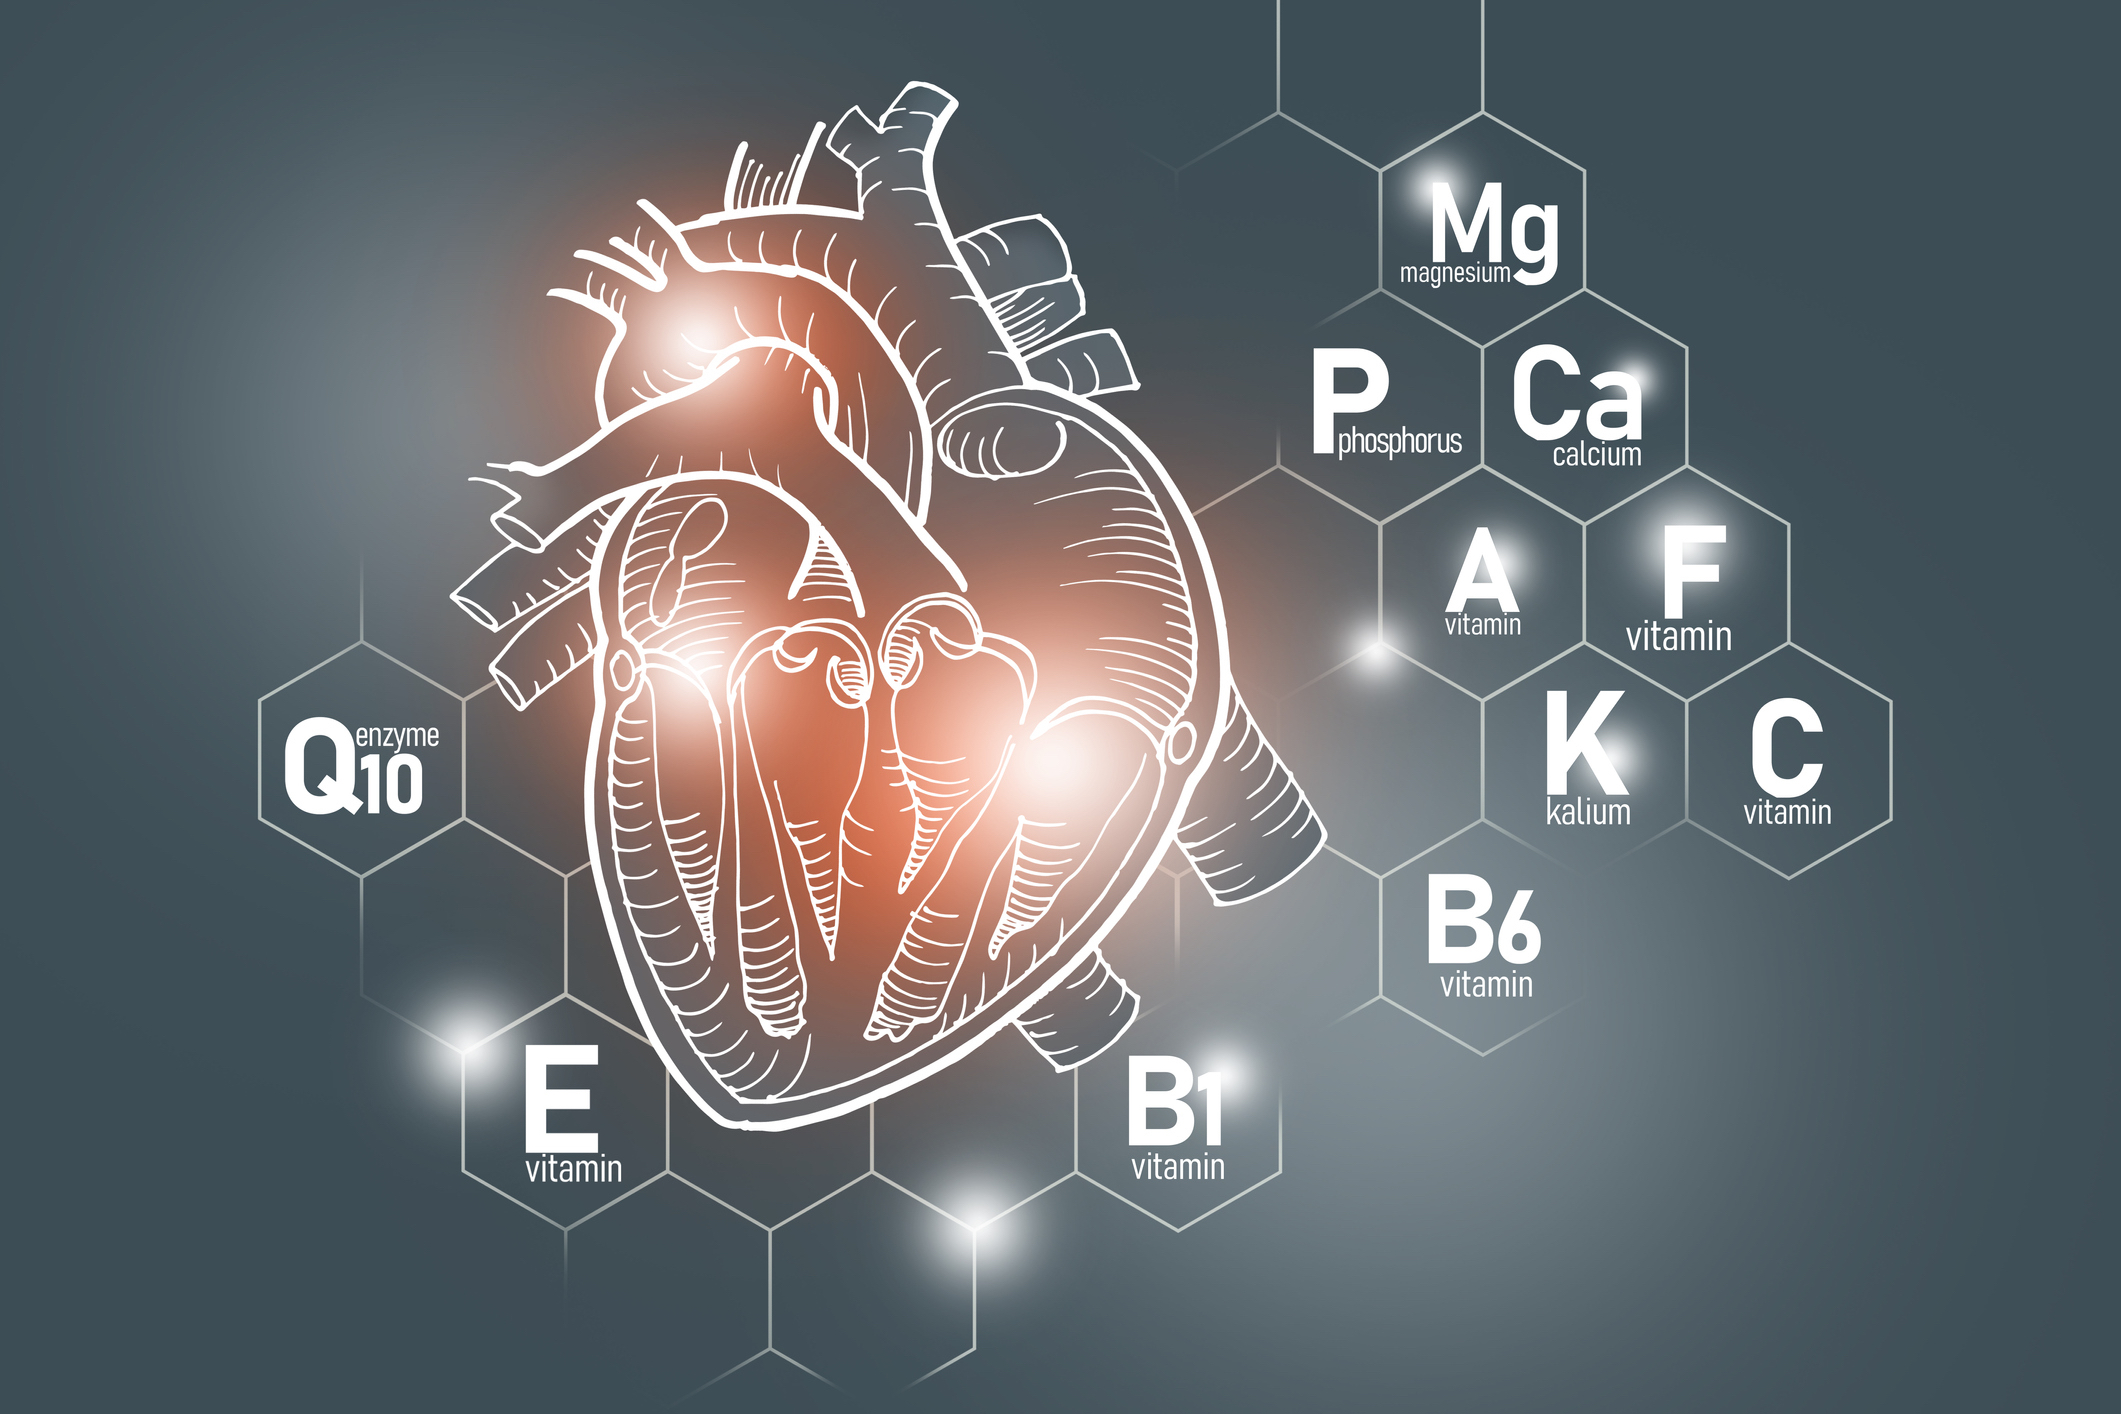 Meta-analysis: Some micronutrients may be better for the heart